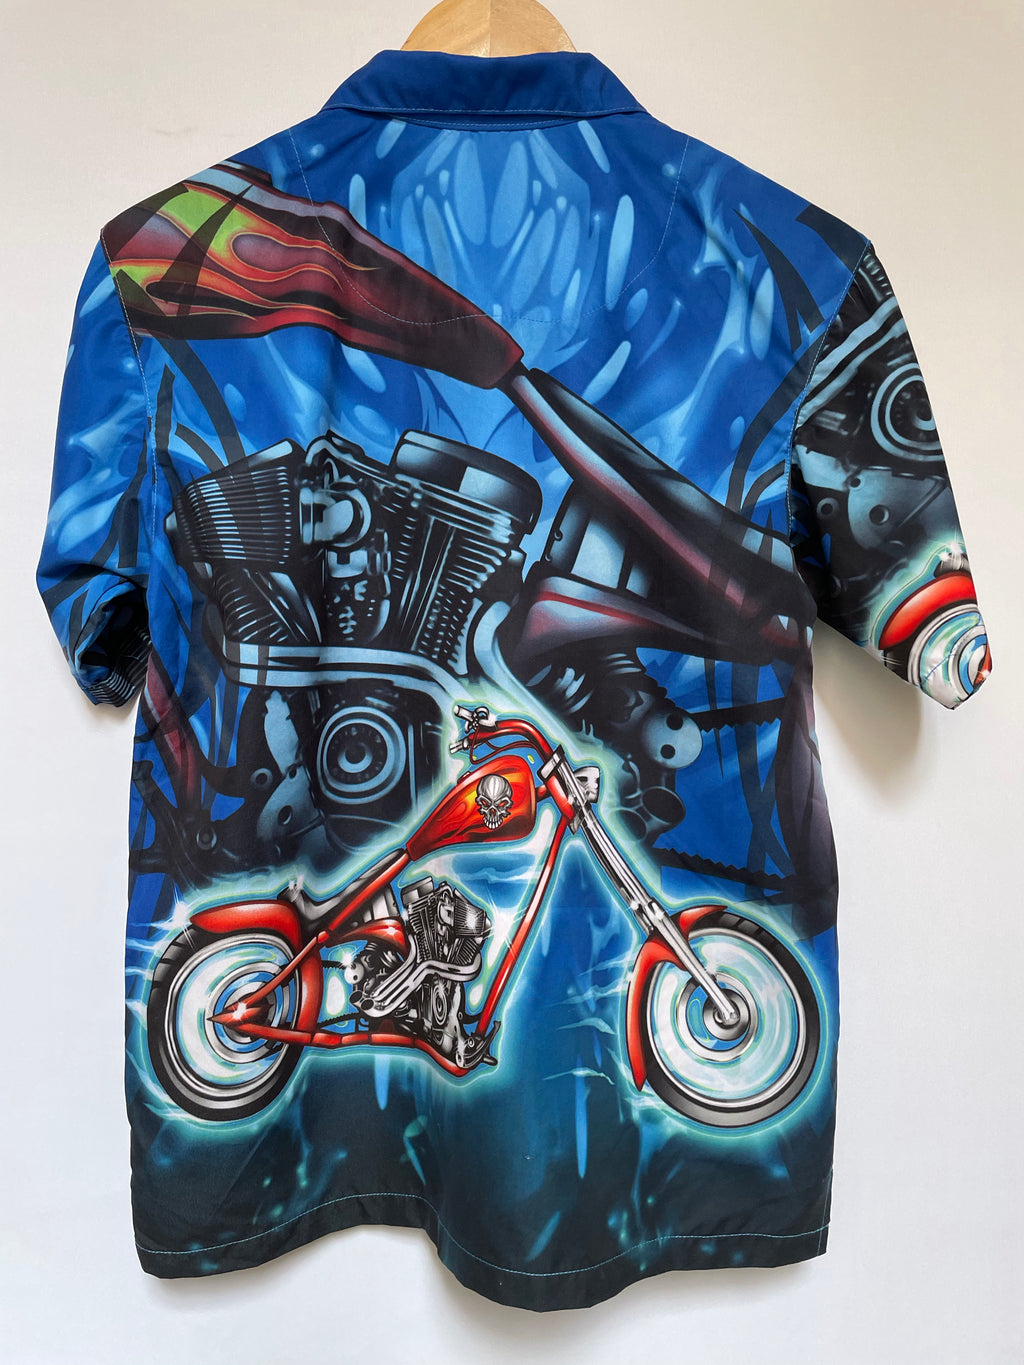 Flame Rider Party Shirt